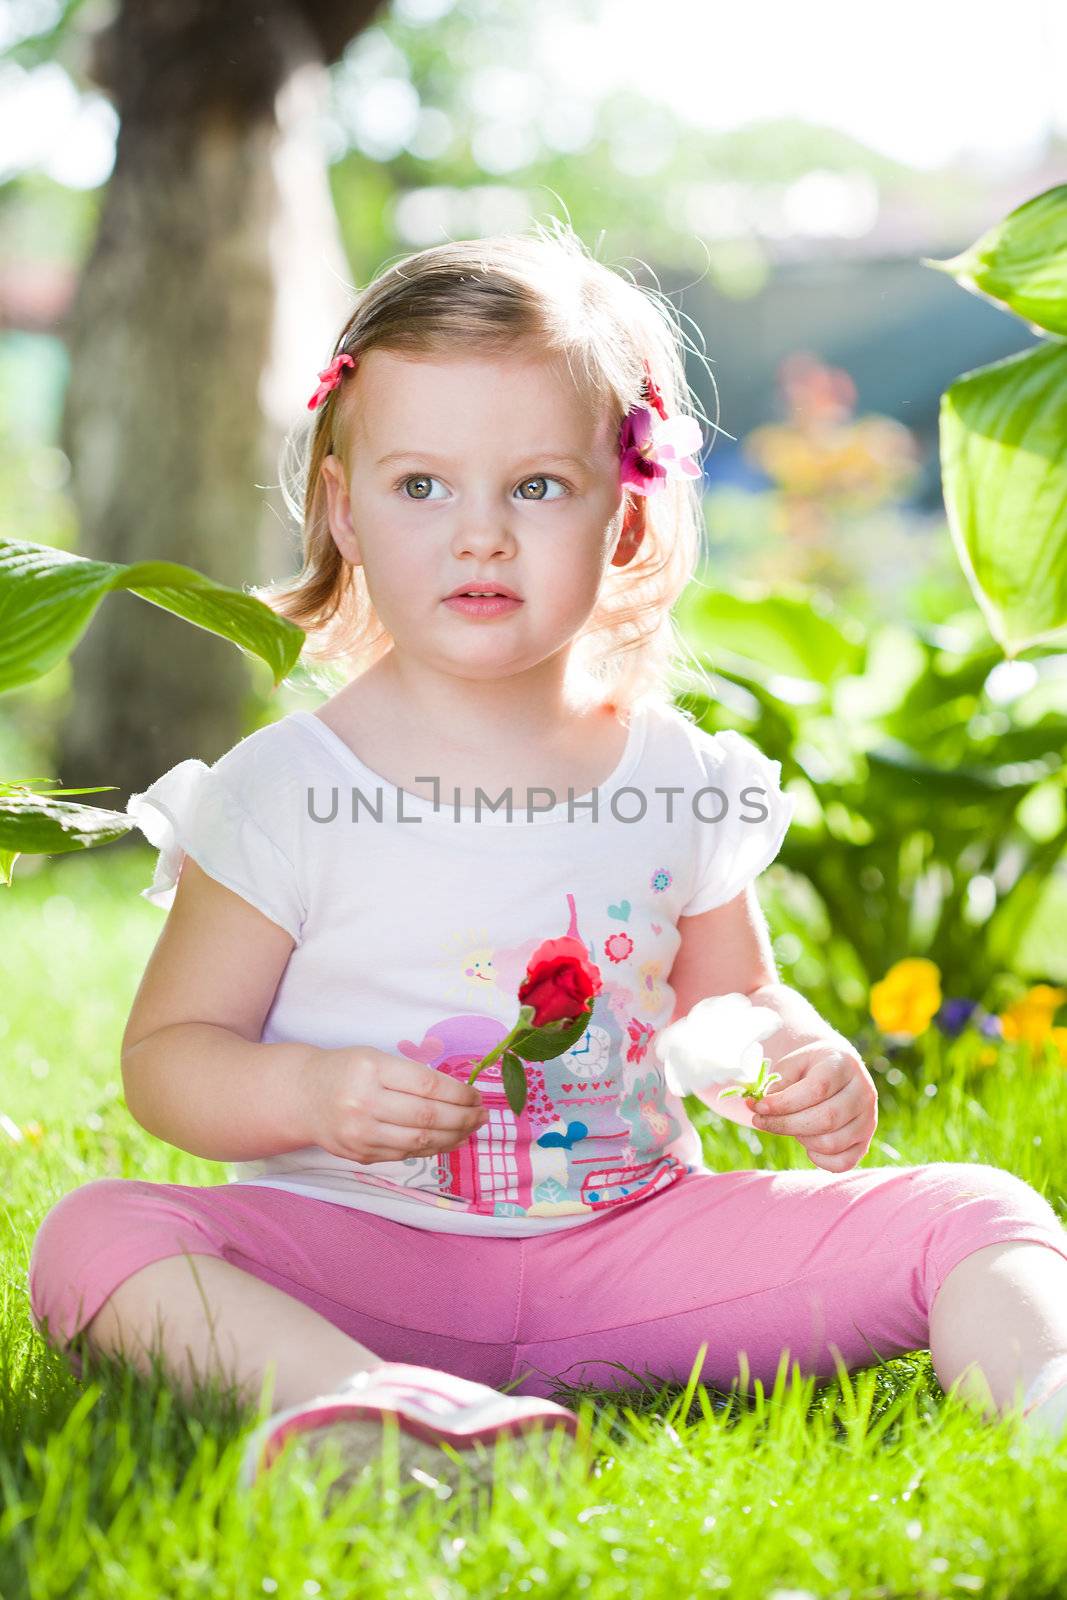 cute little girl playing in the nature